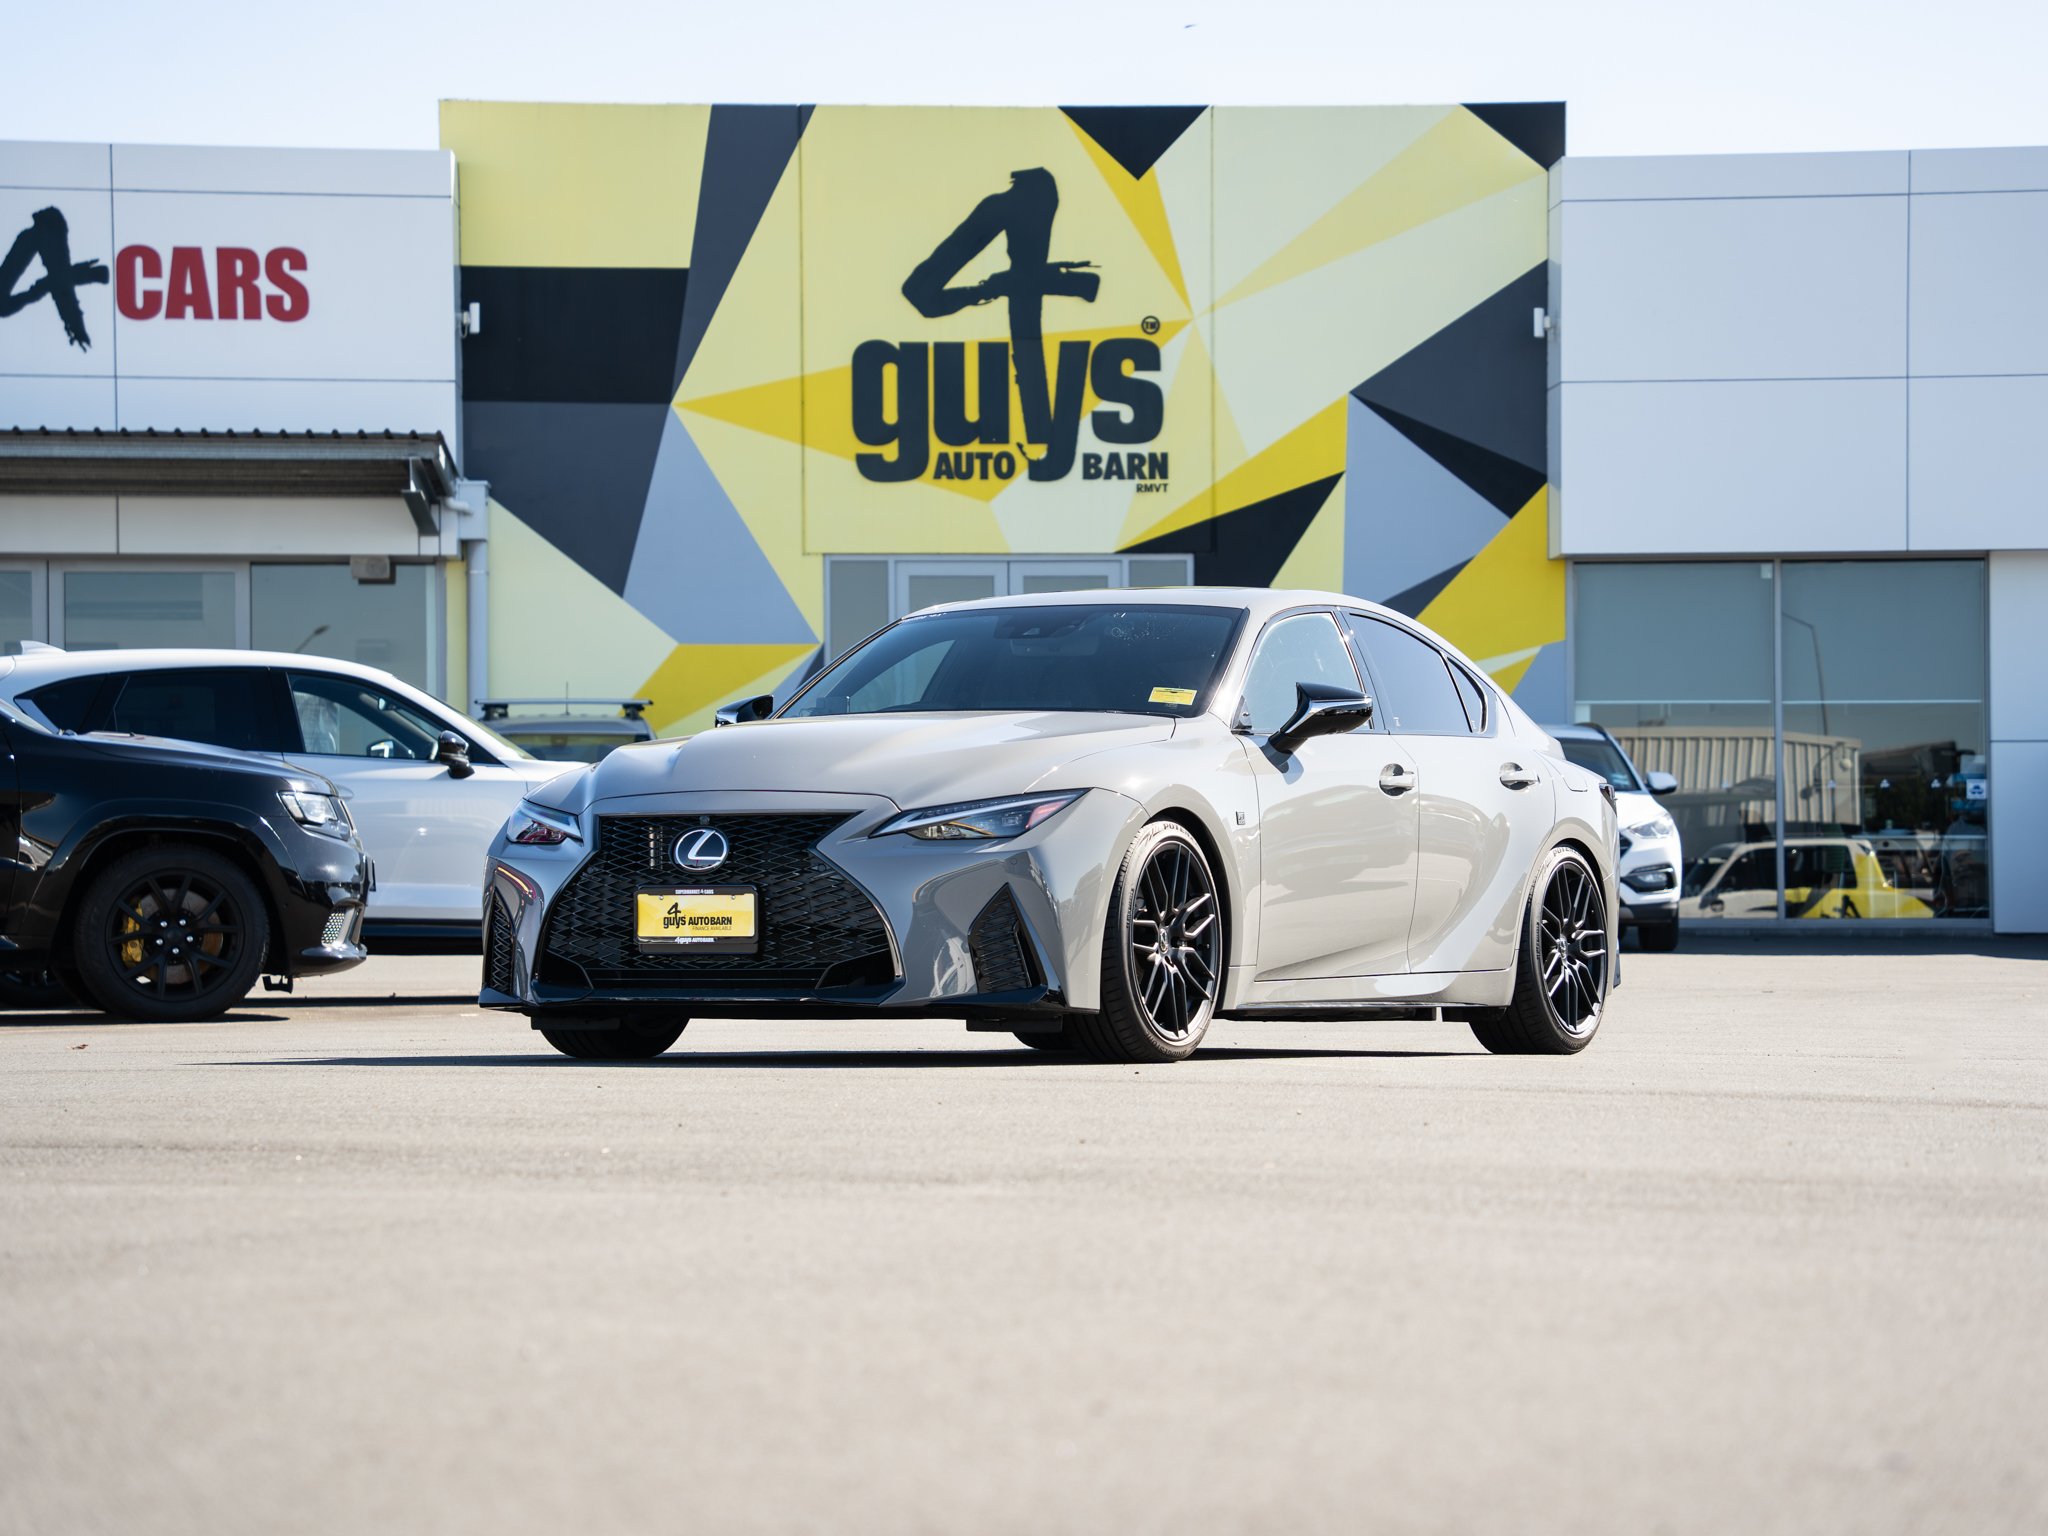 🔥JUST ARRIVED🔥 2023 Lexus IS 500 F SPORT PERFORMANCE V8

Here's a new one for you. So new we had to get TradeMe to add it in!

The 2023 Lexus IS 500 F SPORT Performance First Edition is a luxury sedan powered by a 5.0-liter naturally aspirated V8 e